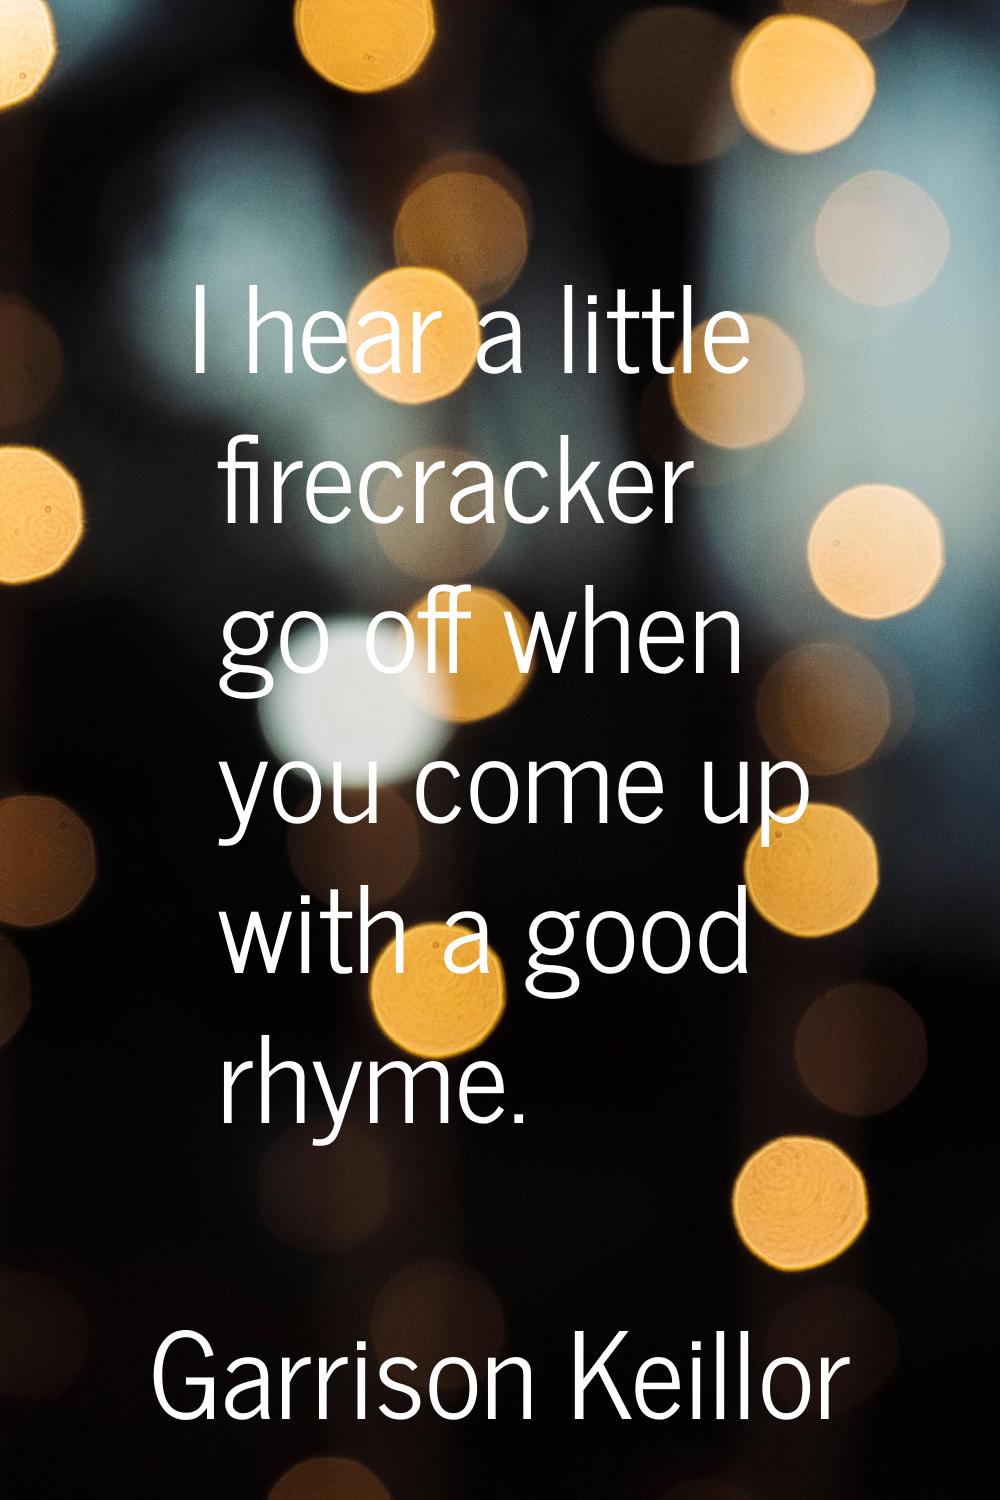 I hear a little firecracker go off when you come up with a good rhyme.